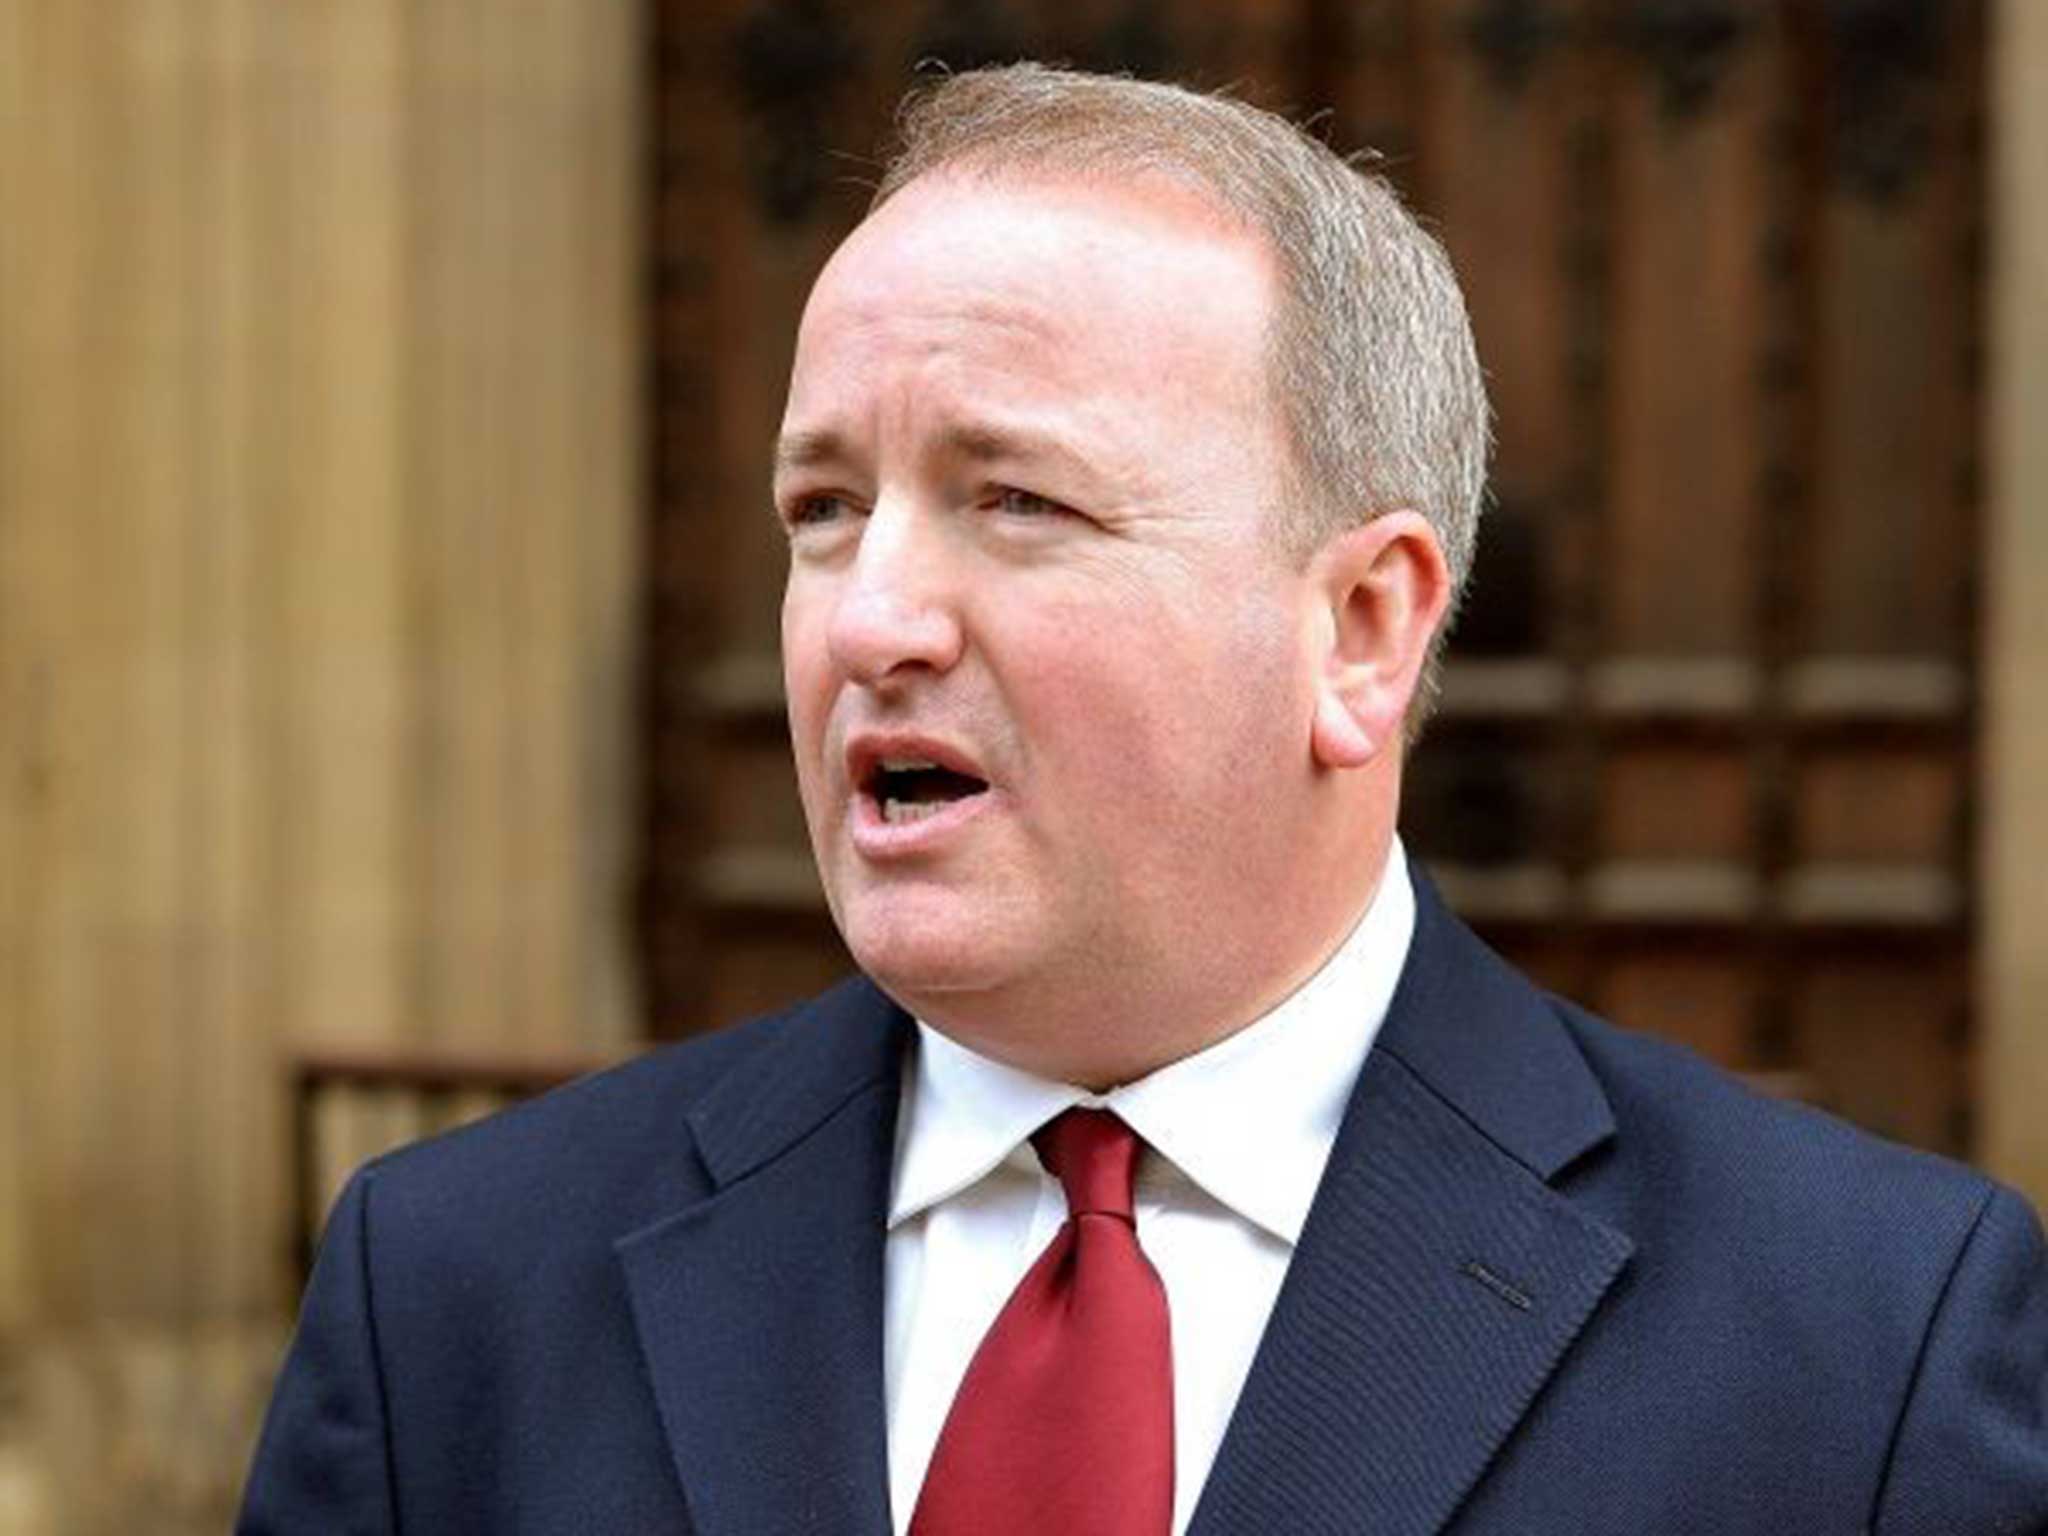 MP Mark Pritchard speaking outside the House of Parliament